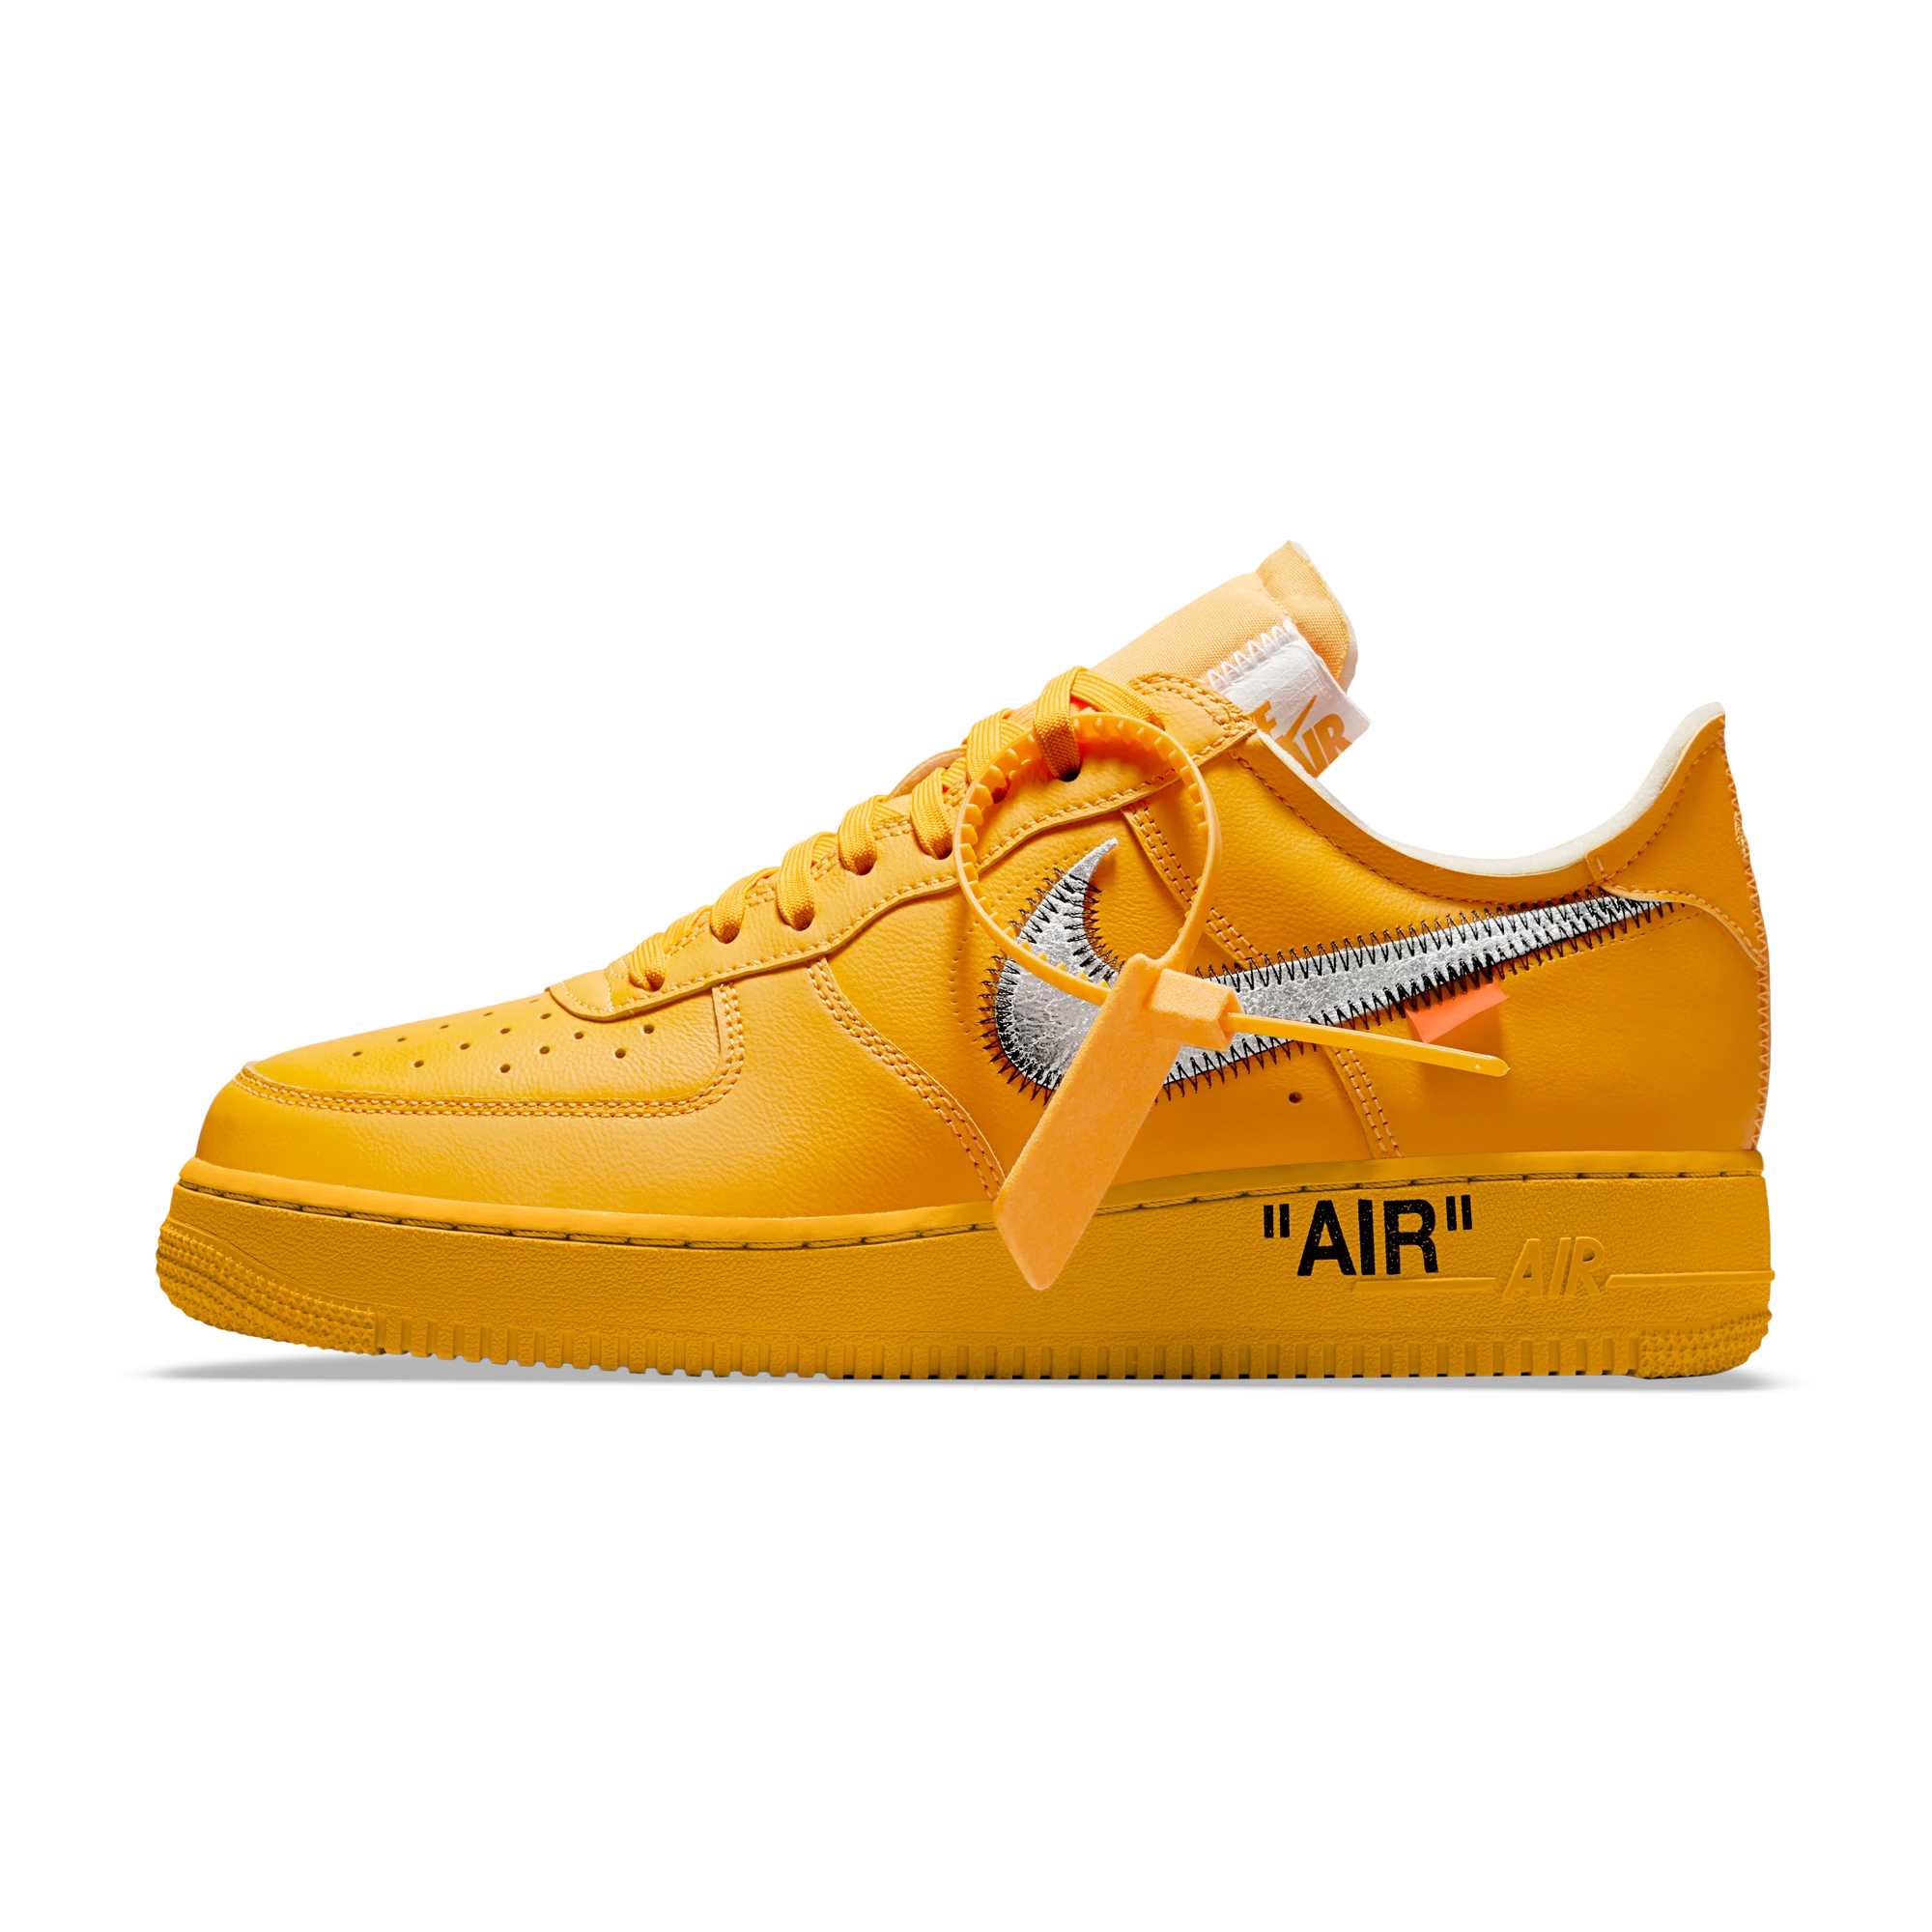 Off White Air Force 1s just dropped on canary—-yellow.com, anyone get  lucky? : r/SNKRS